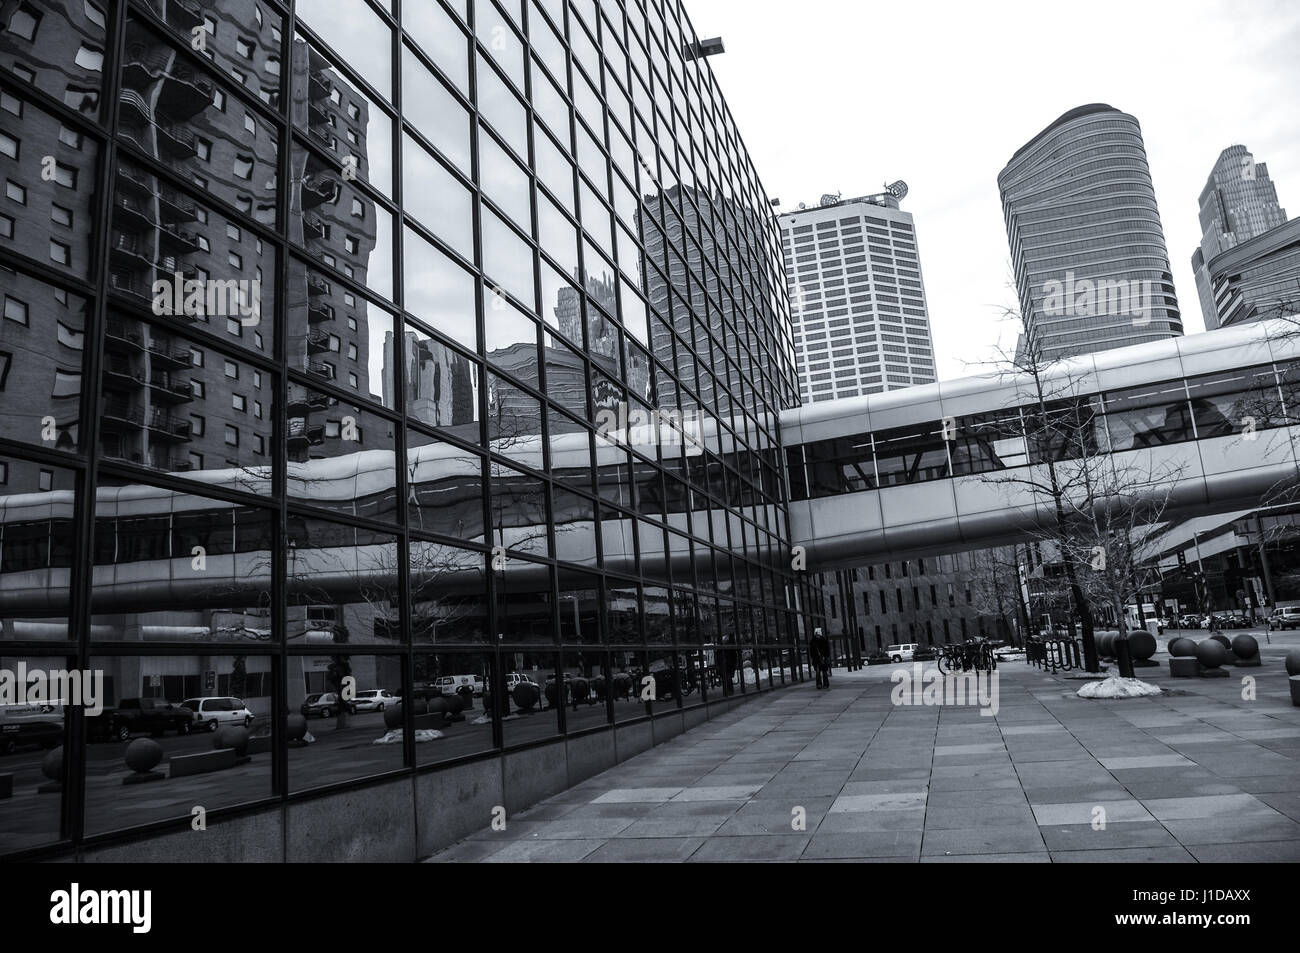 Minneapolis, USA.  Th Minneapolis building has mirrored windows which are reflecting the skyway skywalk transportation system used in winter. Stock Photo